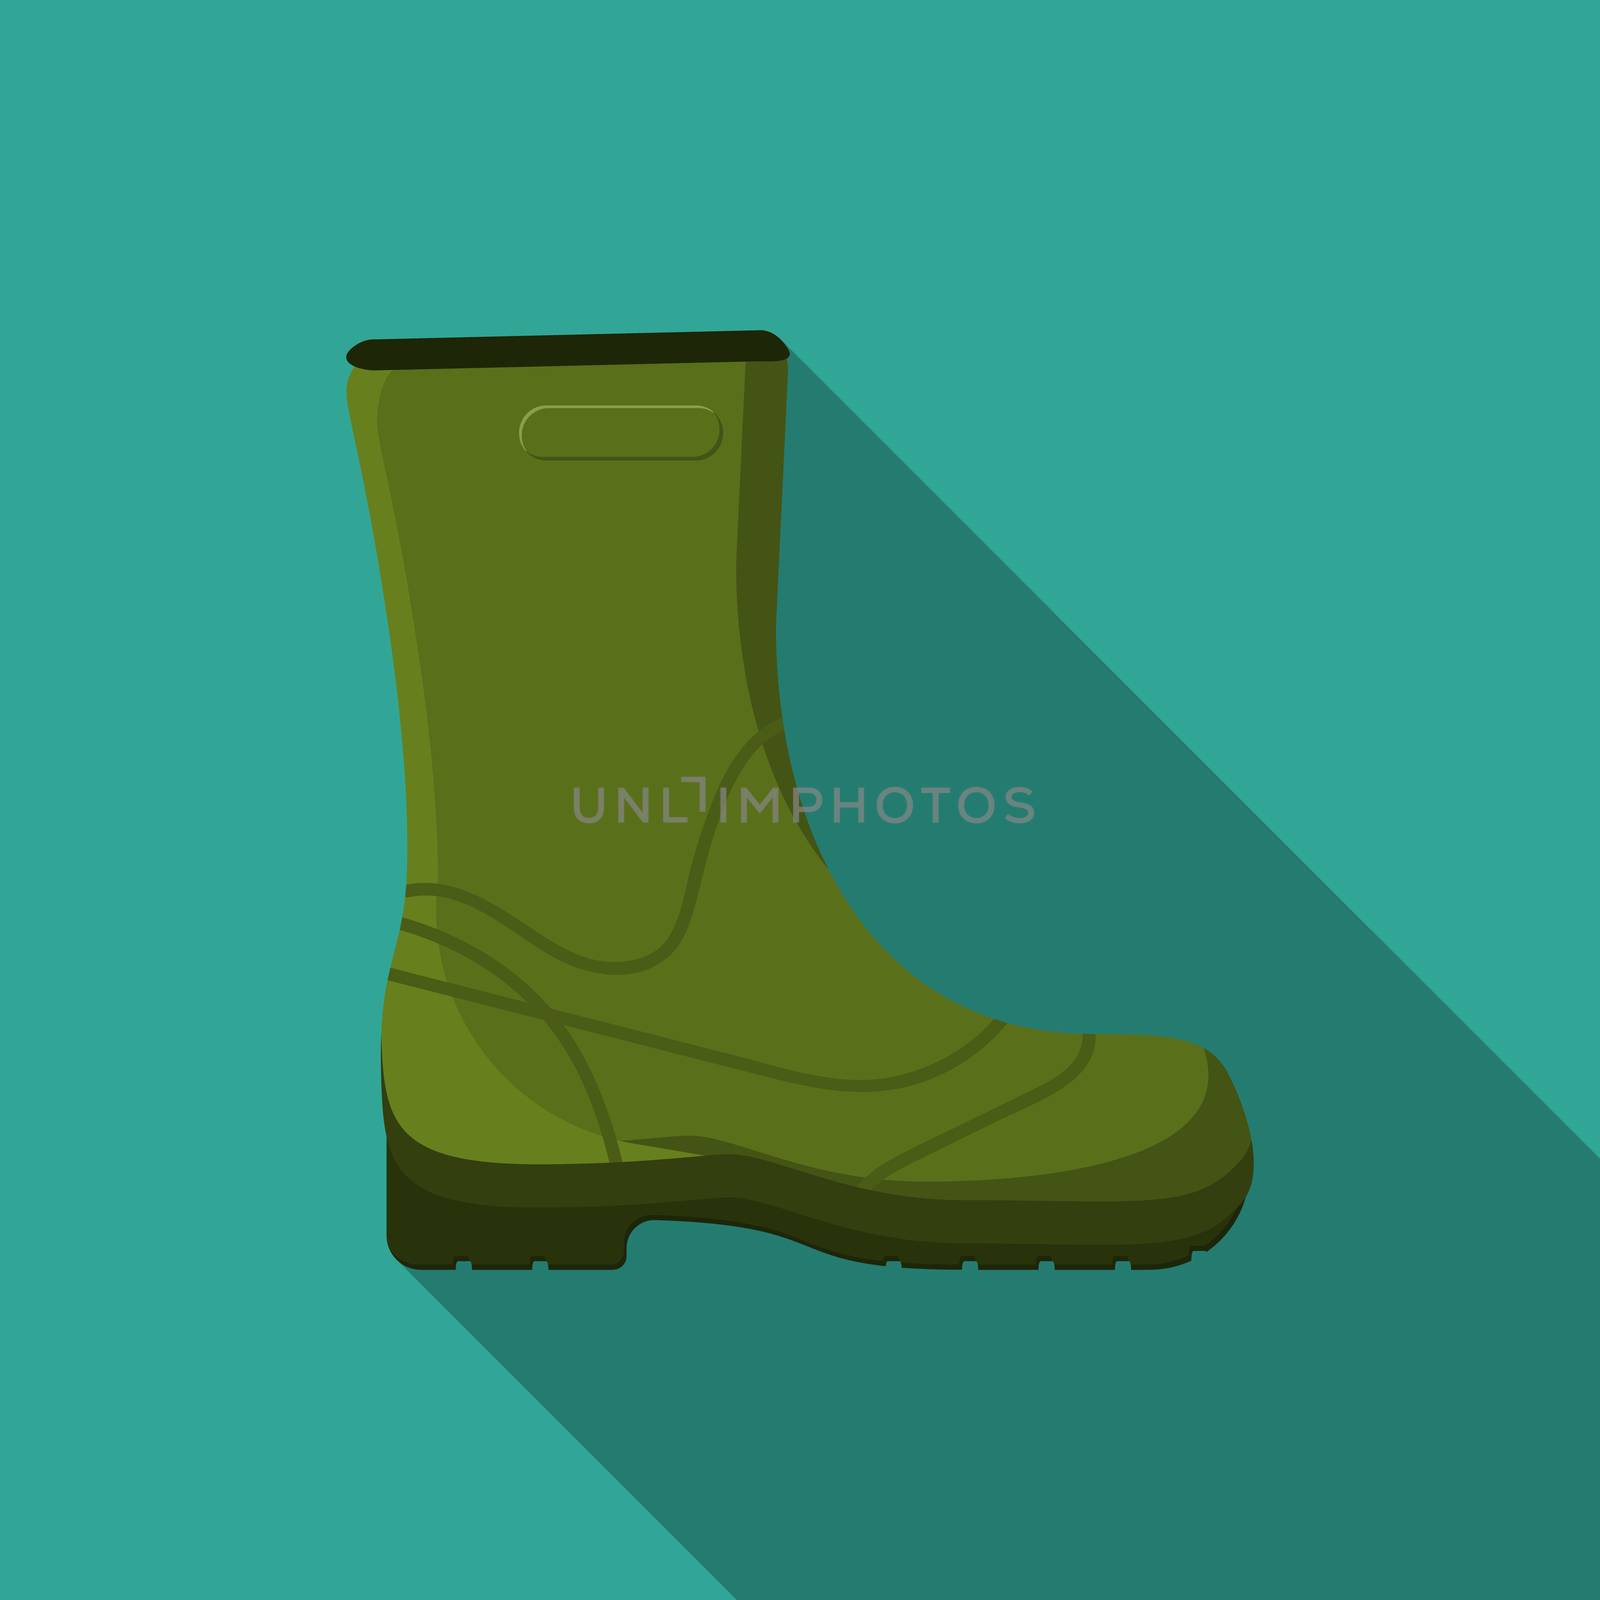 Flat design modern vector illustration of rubber boot icon, camping, hiking and fishing equipment with long shadow.